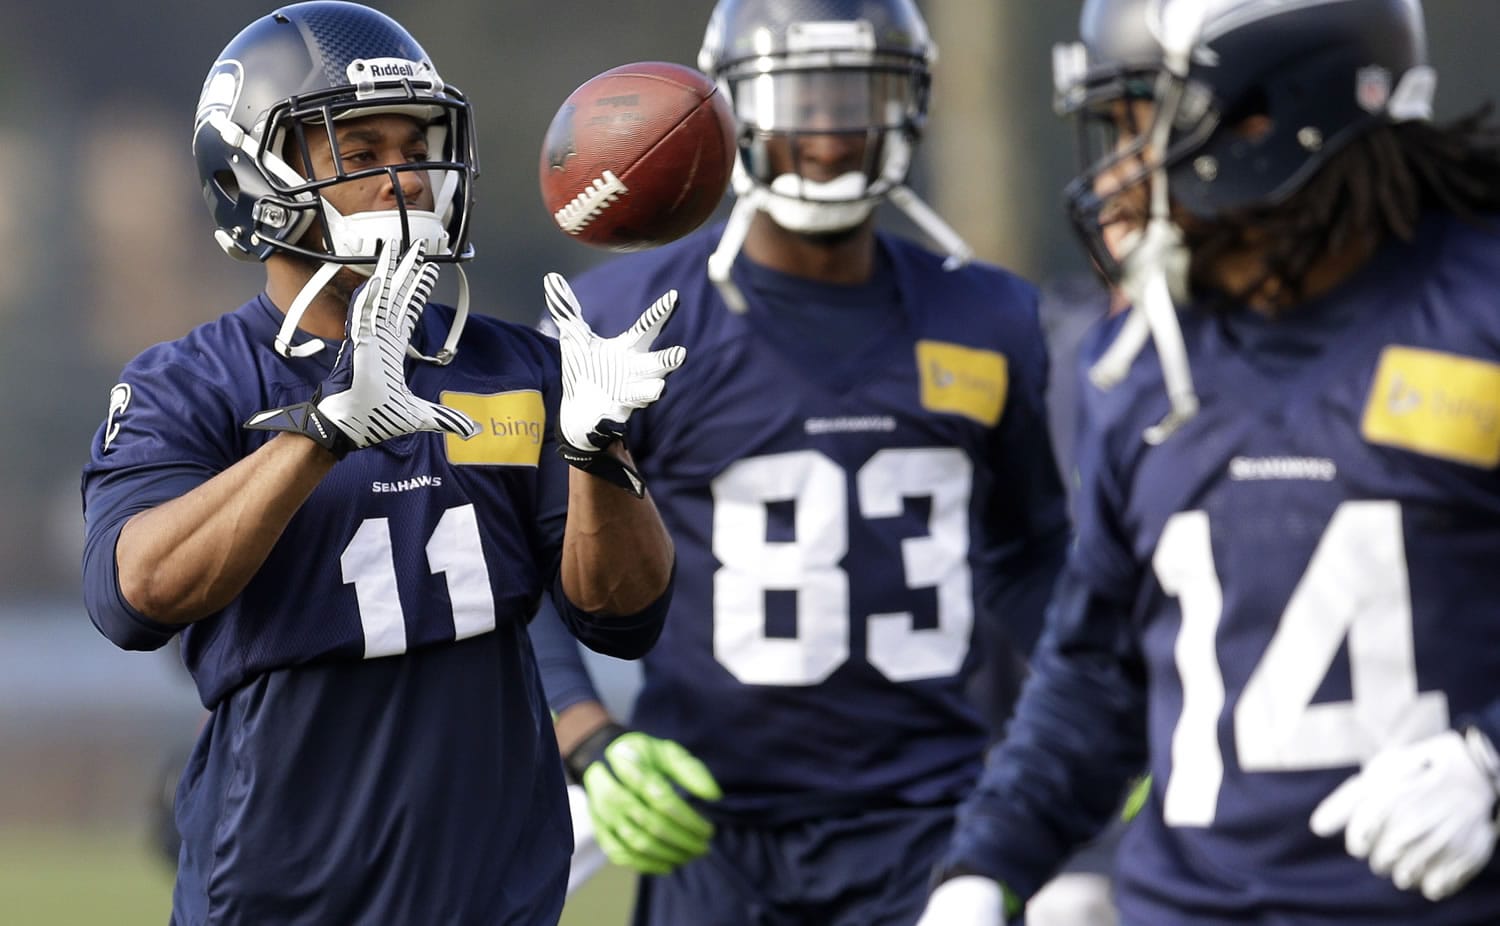 Seattle Seahawks wide receiver Percy Harvin (11) catches a ball tossed to him during warmups for Friday's practice. Looking on are wide receiver Ricardo Lockette (83) and practice squad wide receiver Arceto Clark (14). Seattle plays at home in a playoff game on Jan. 11. (AP Photo/Ted S.